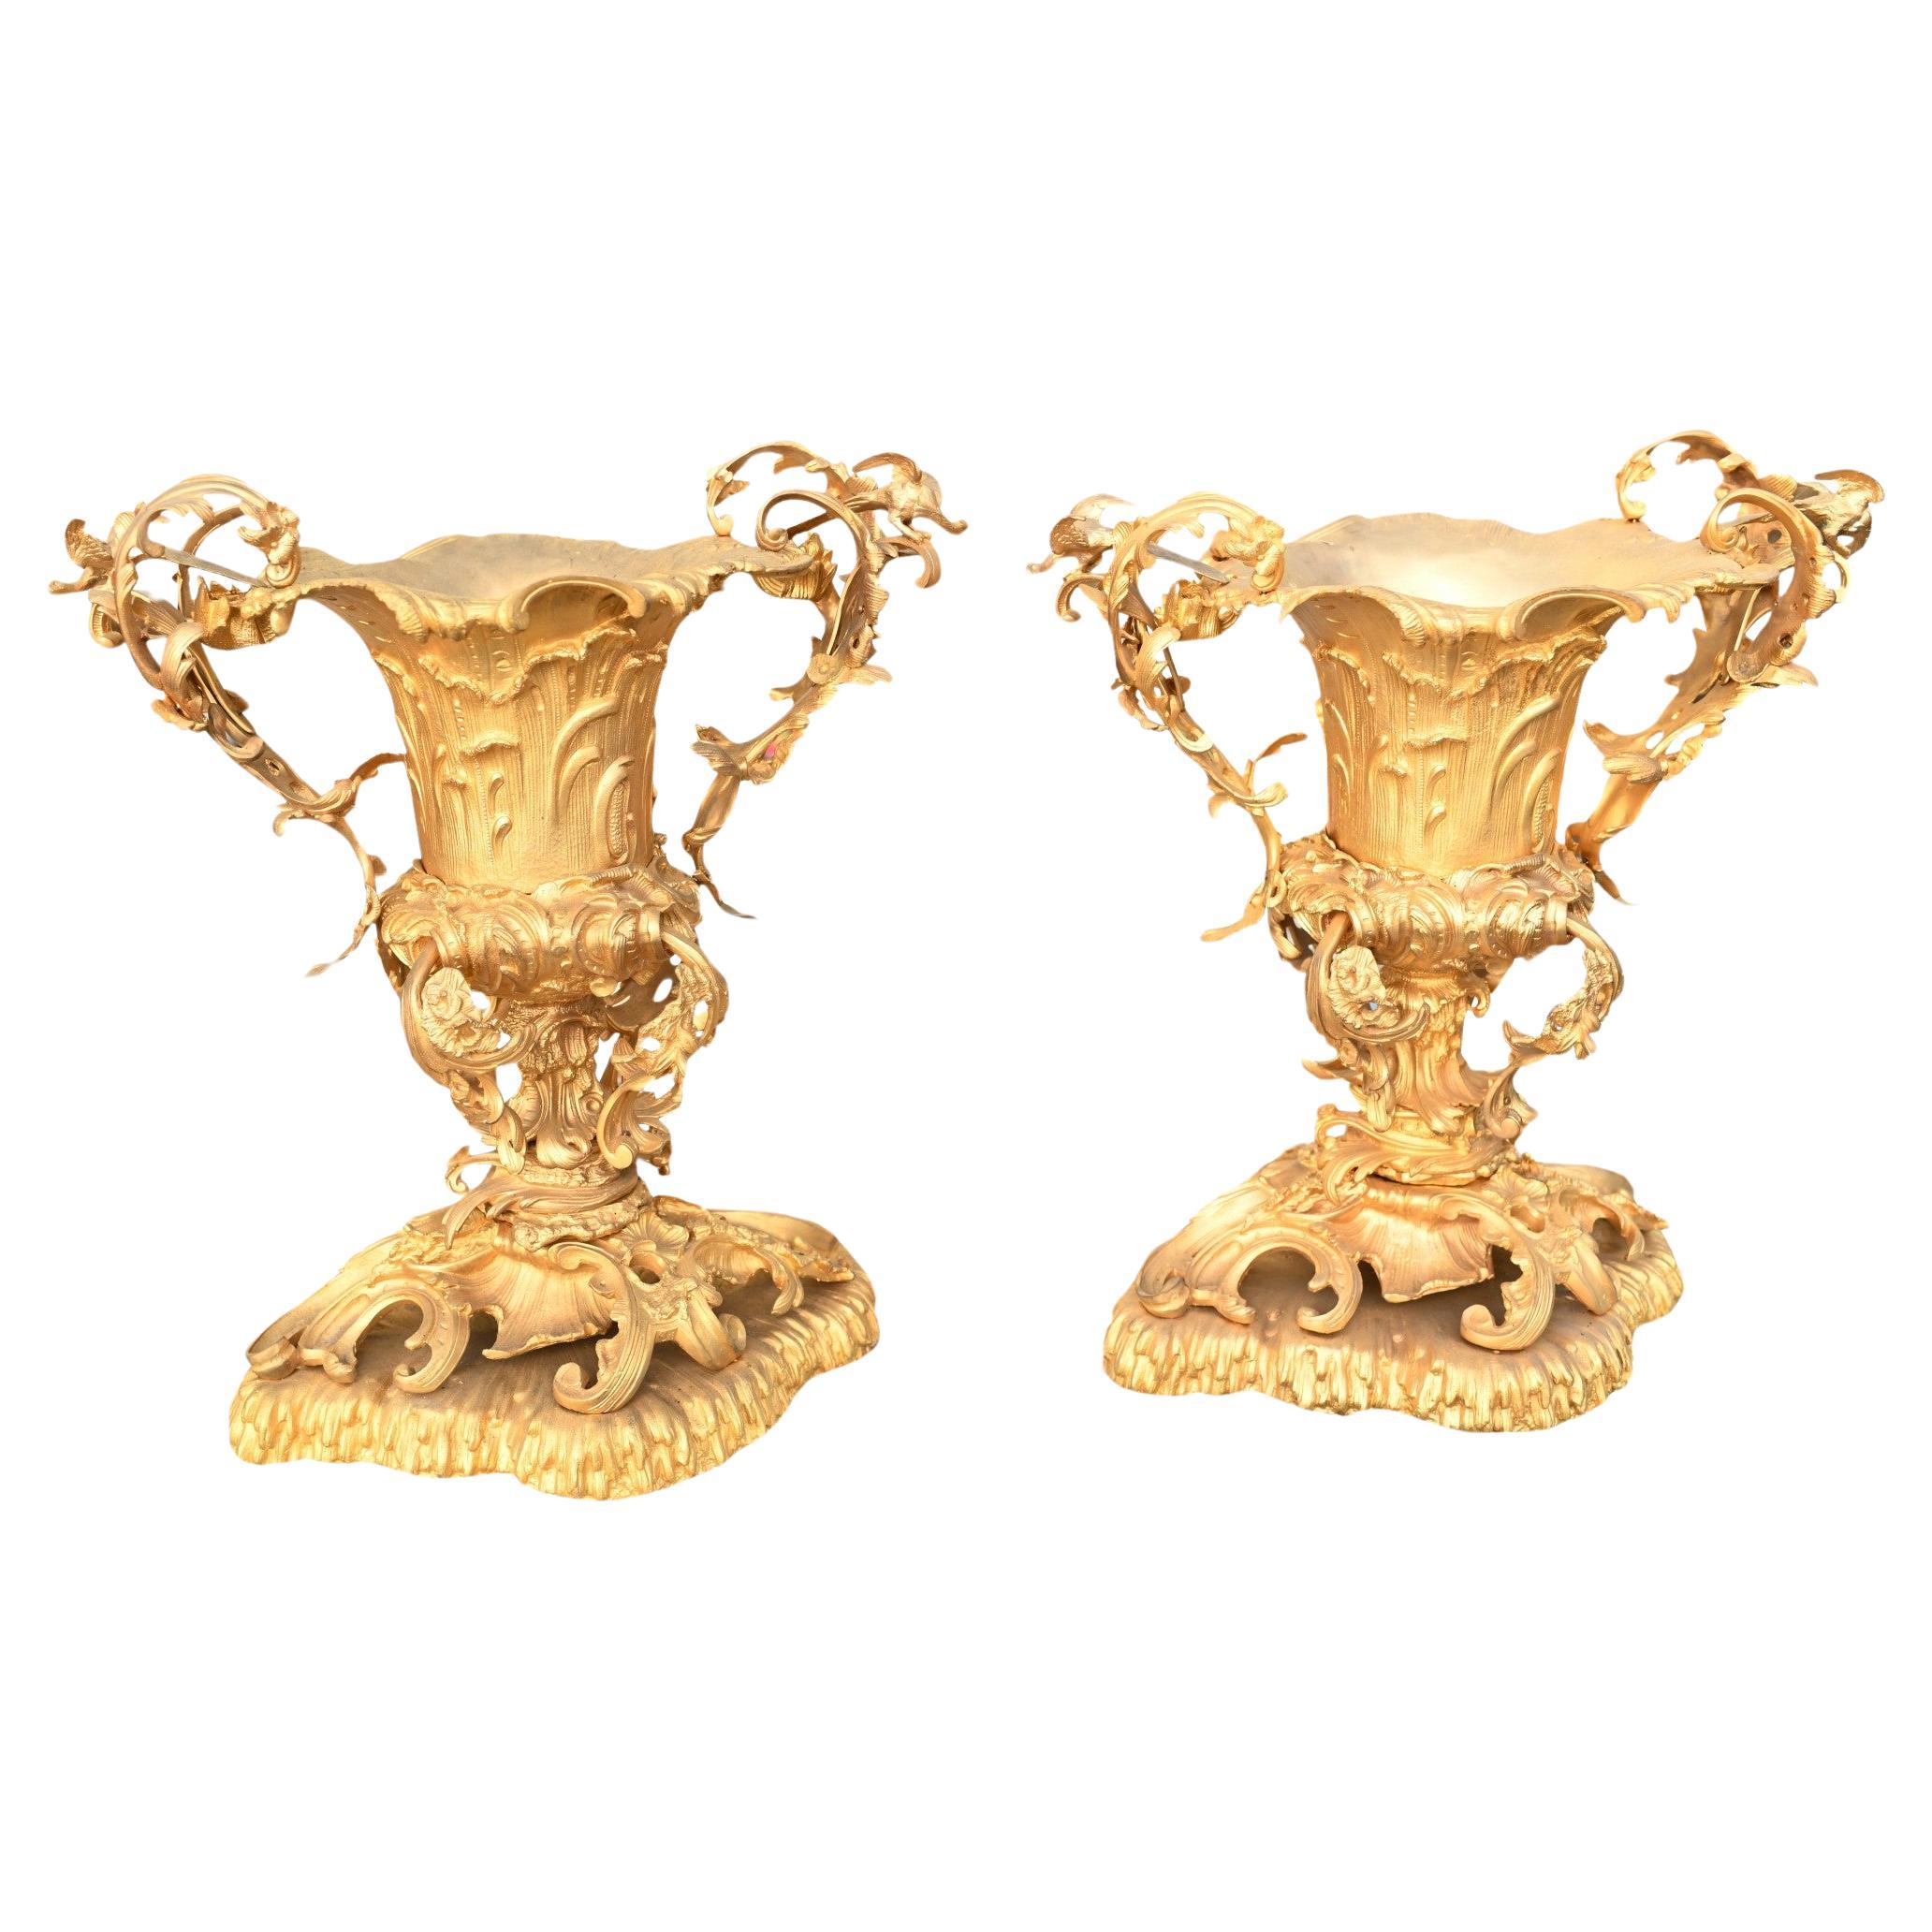 Pair Gilt Rococo Urns French Gilt Tureens Louis Rocaille For Sale